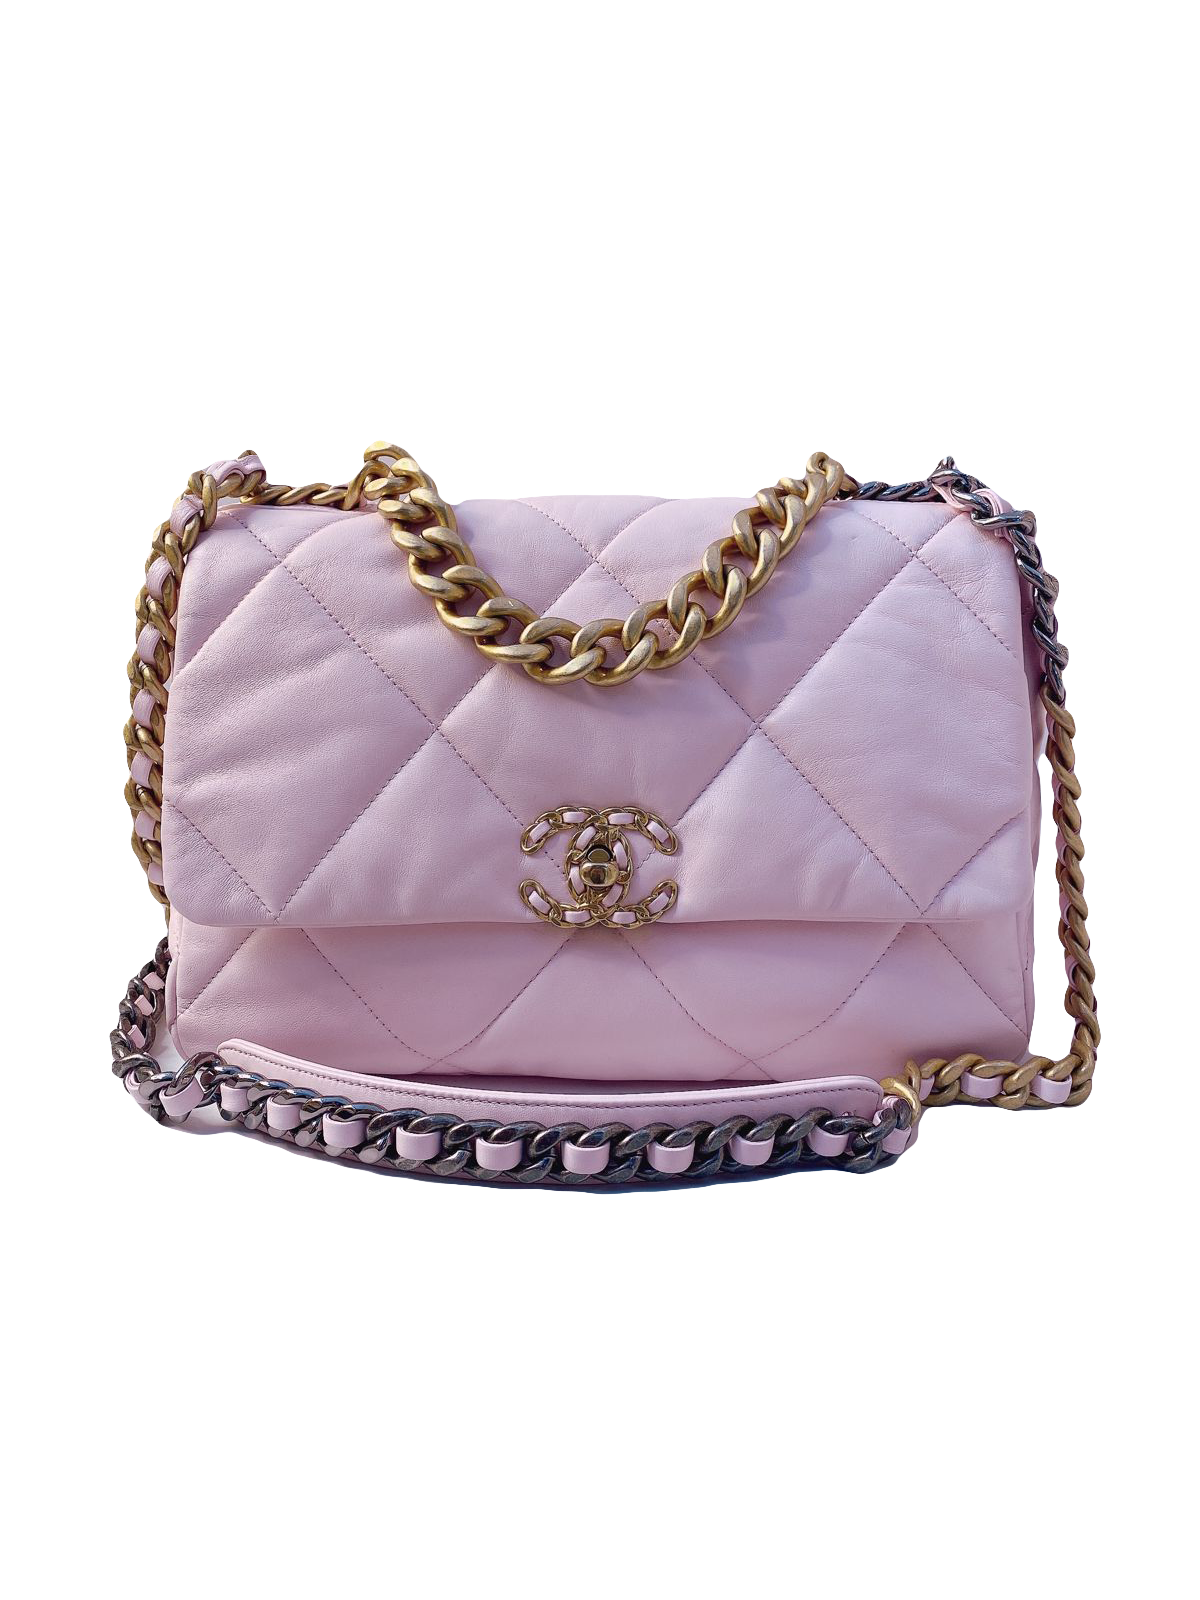 LIGHT PINK LAMBSKIN QUILTED LEATHER LARGE CHANEL 19 FLAP BAG - styleforless